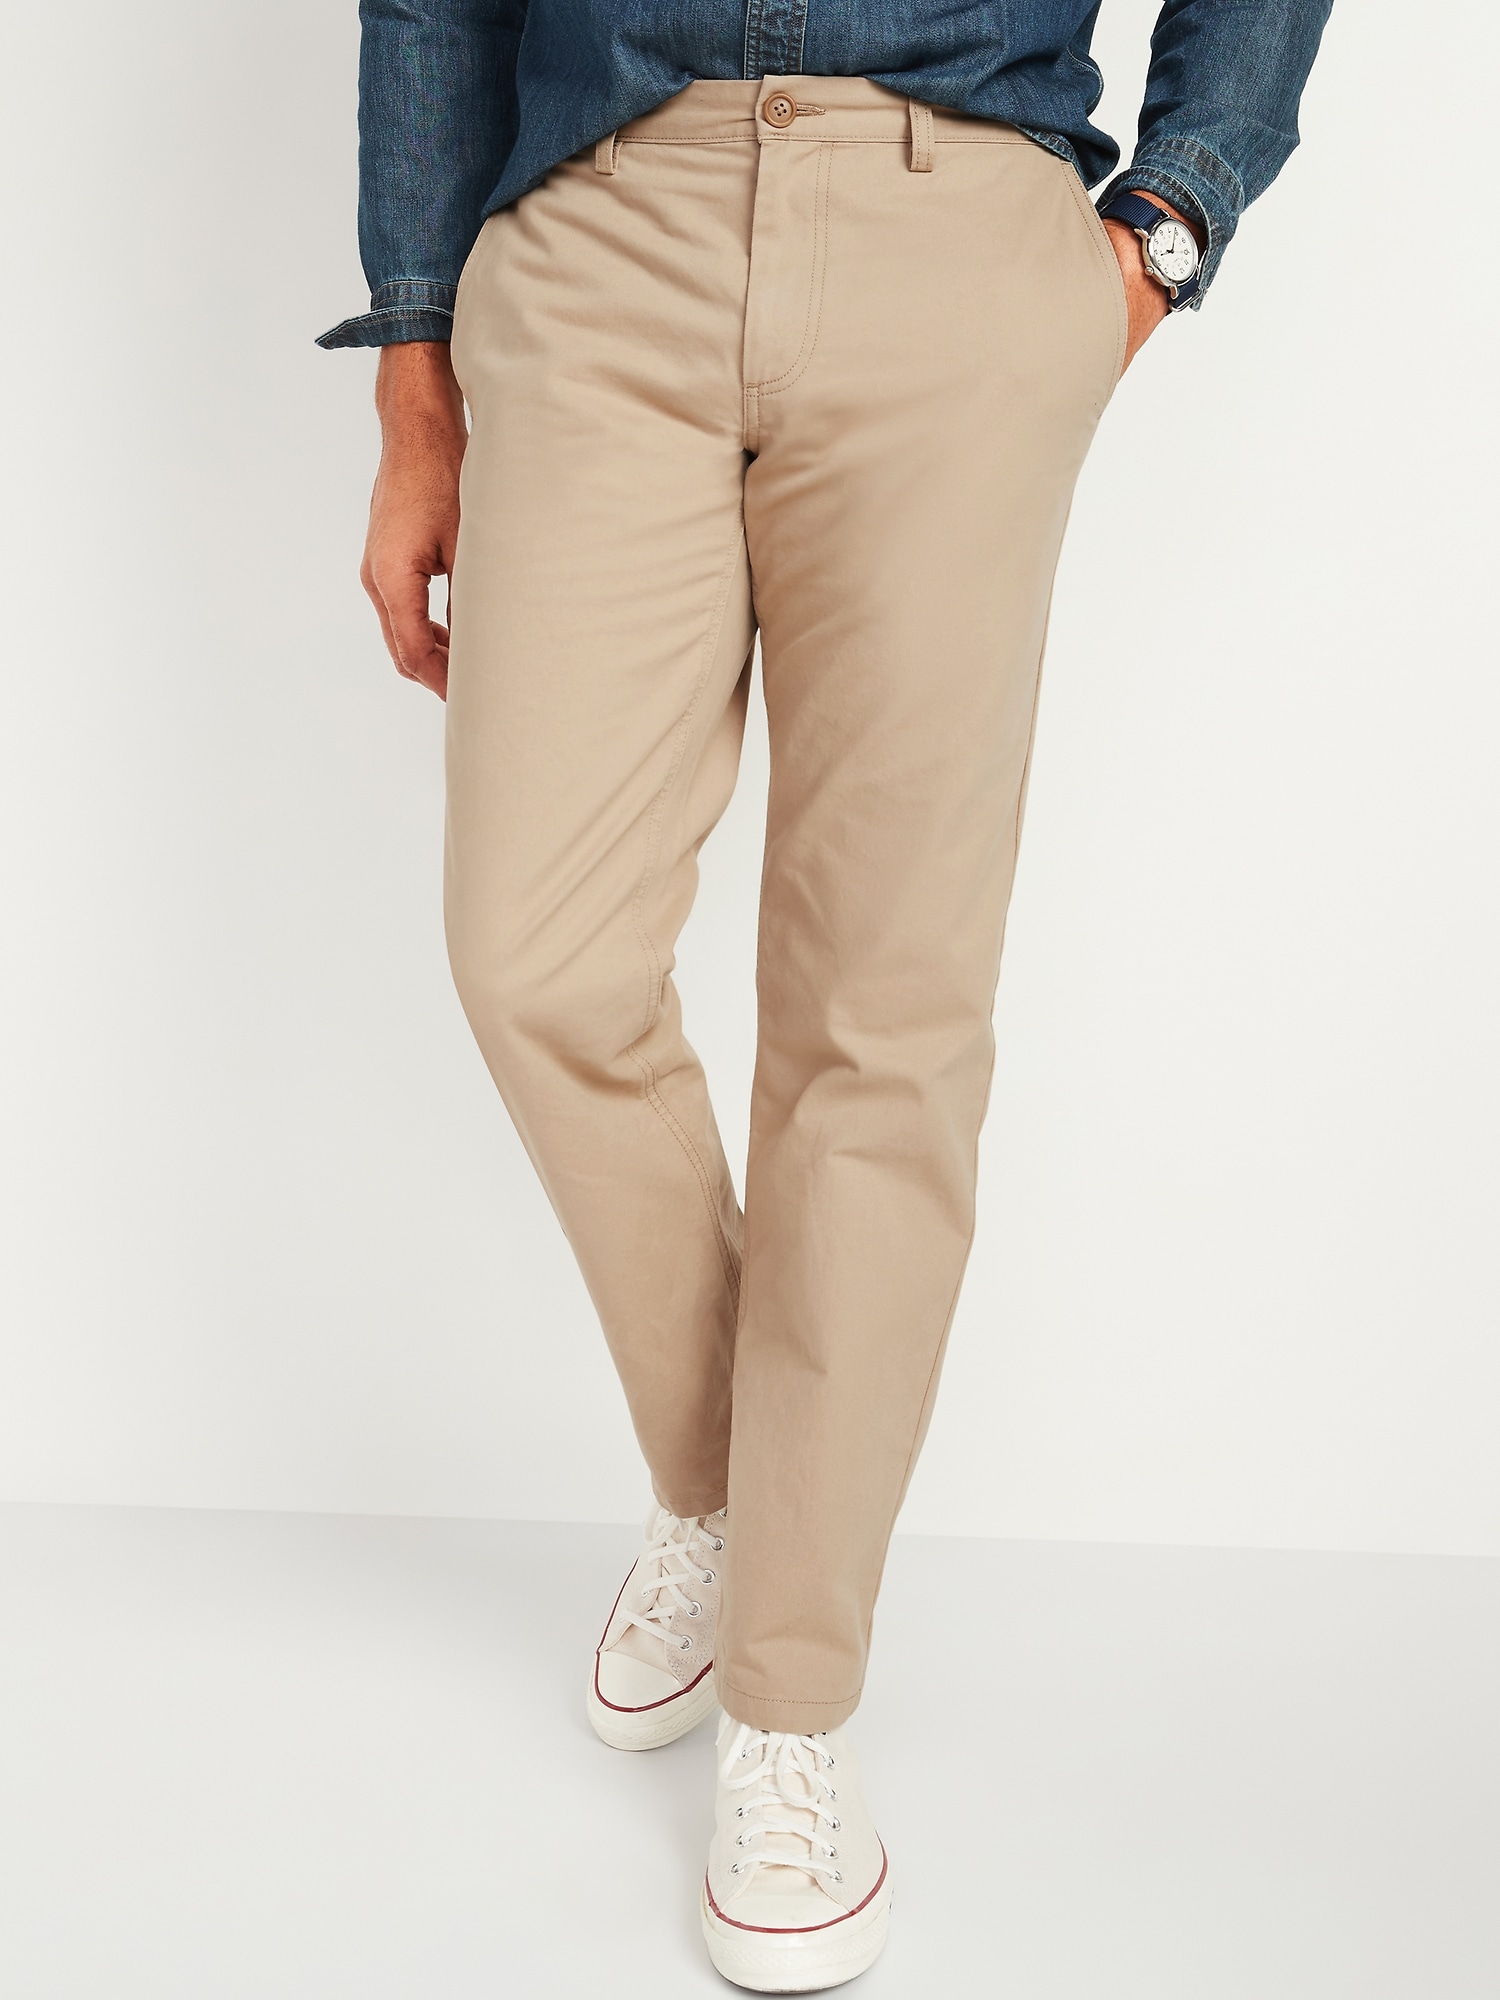 Loose Lived-In Khaki Non-Stretch Pants for Men